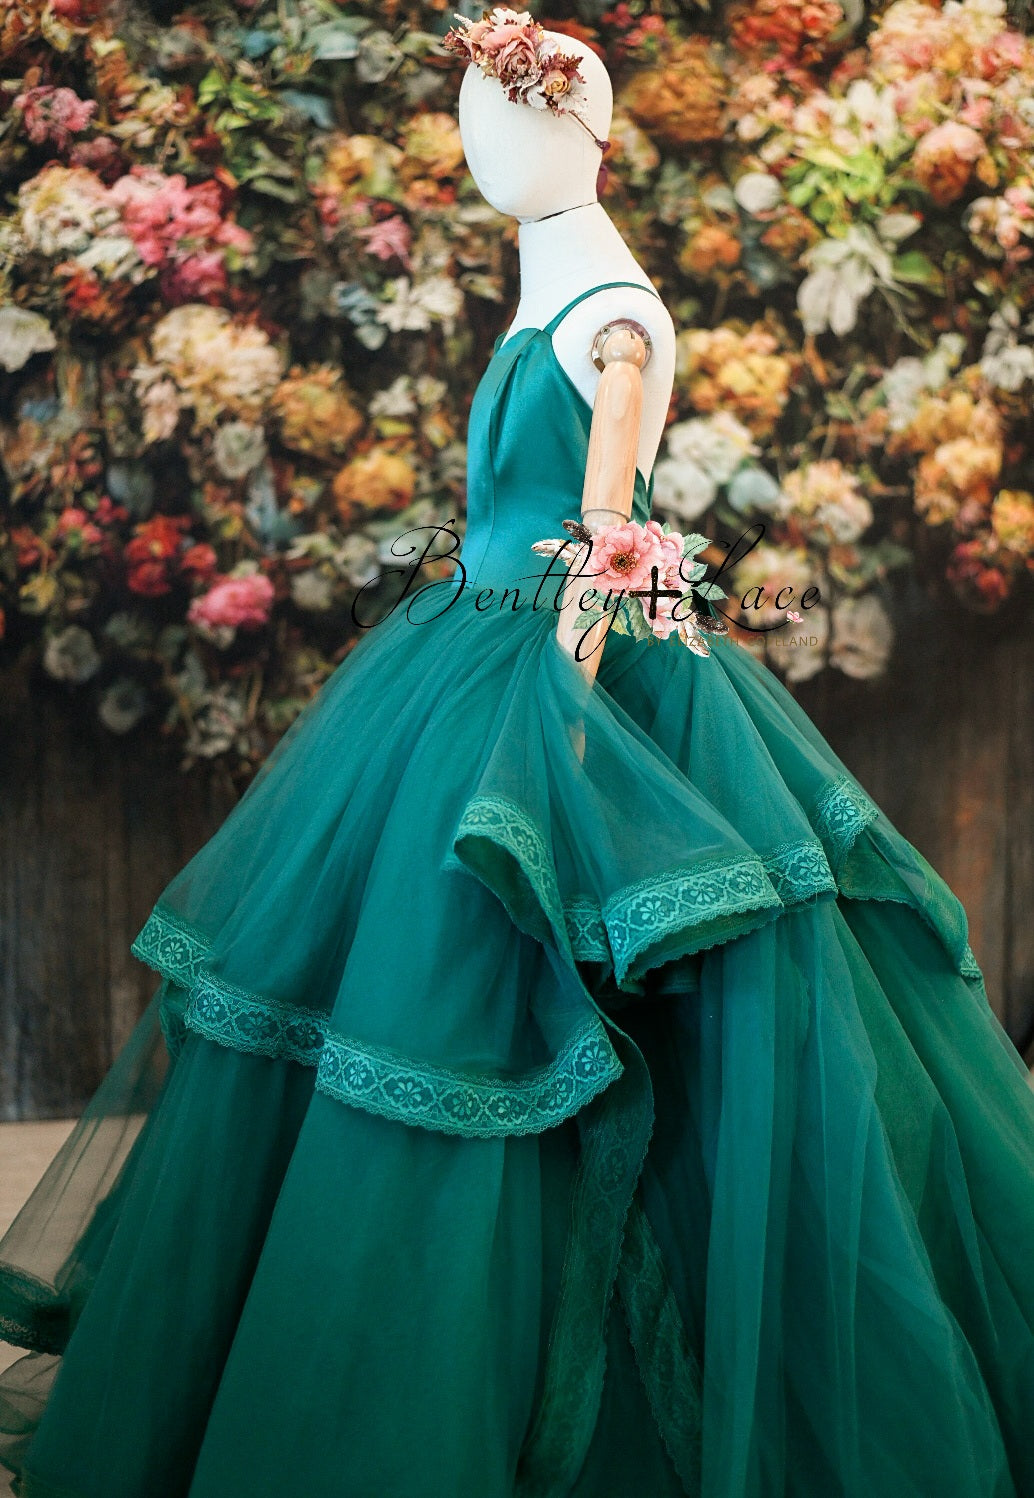 Cascade custom Solid gown- choose color Editorial Dress, Couture Gown, Special Occasion Dress